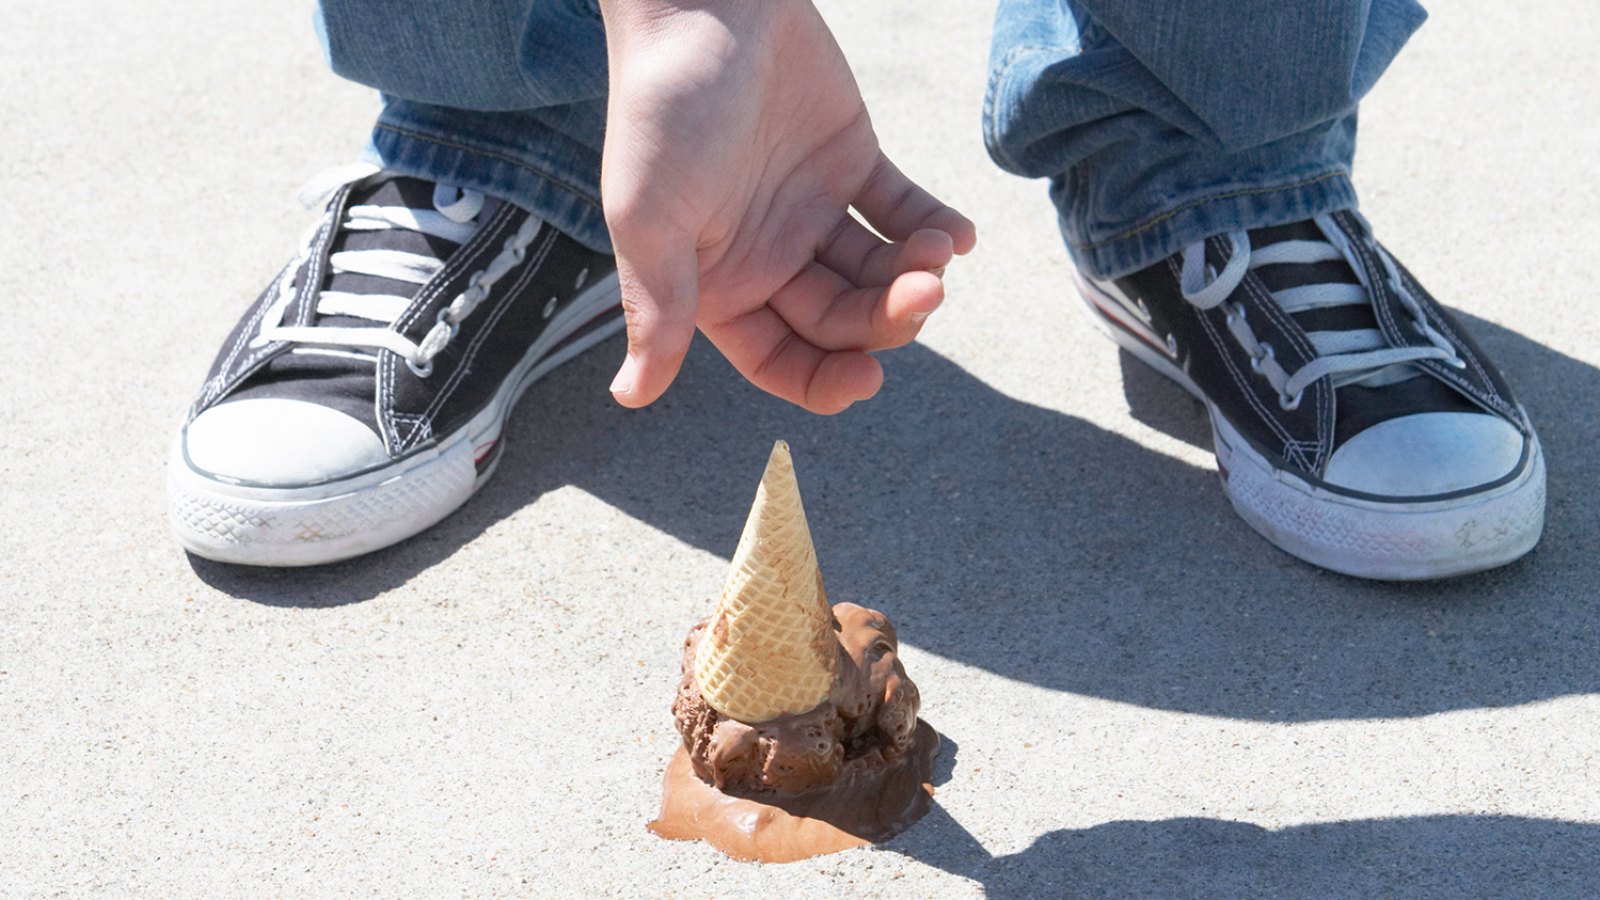 Young Man Reaching for Dropped Ice Cream Cone